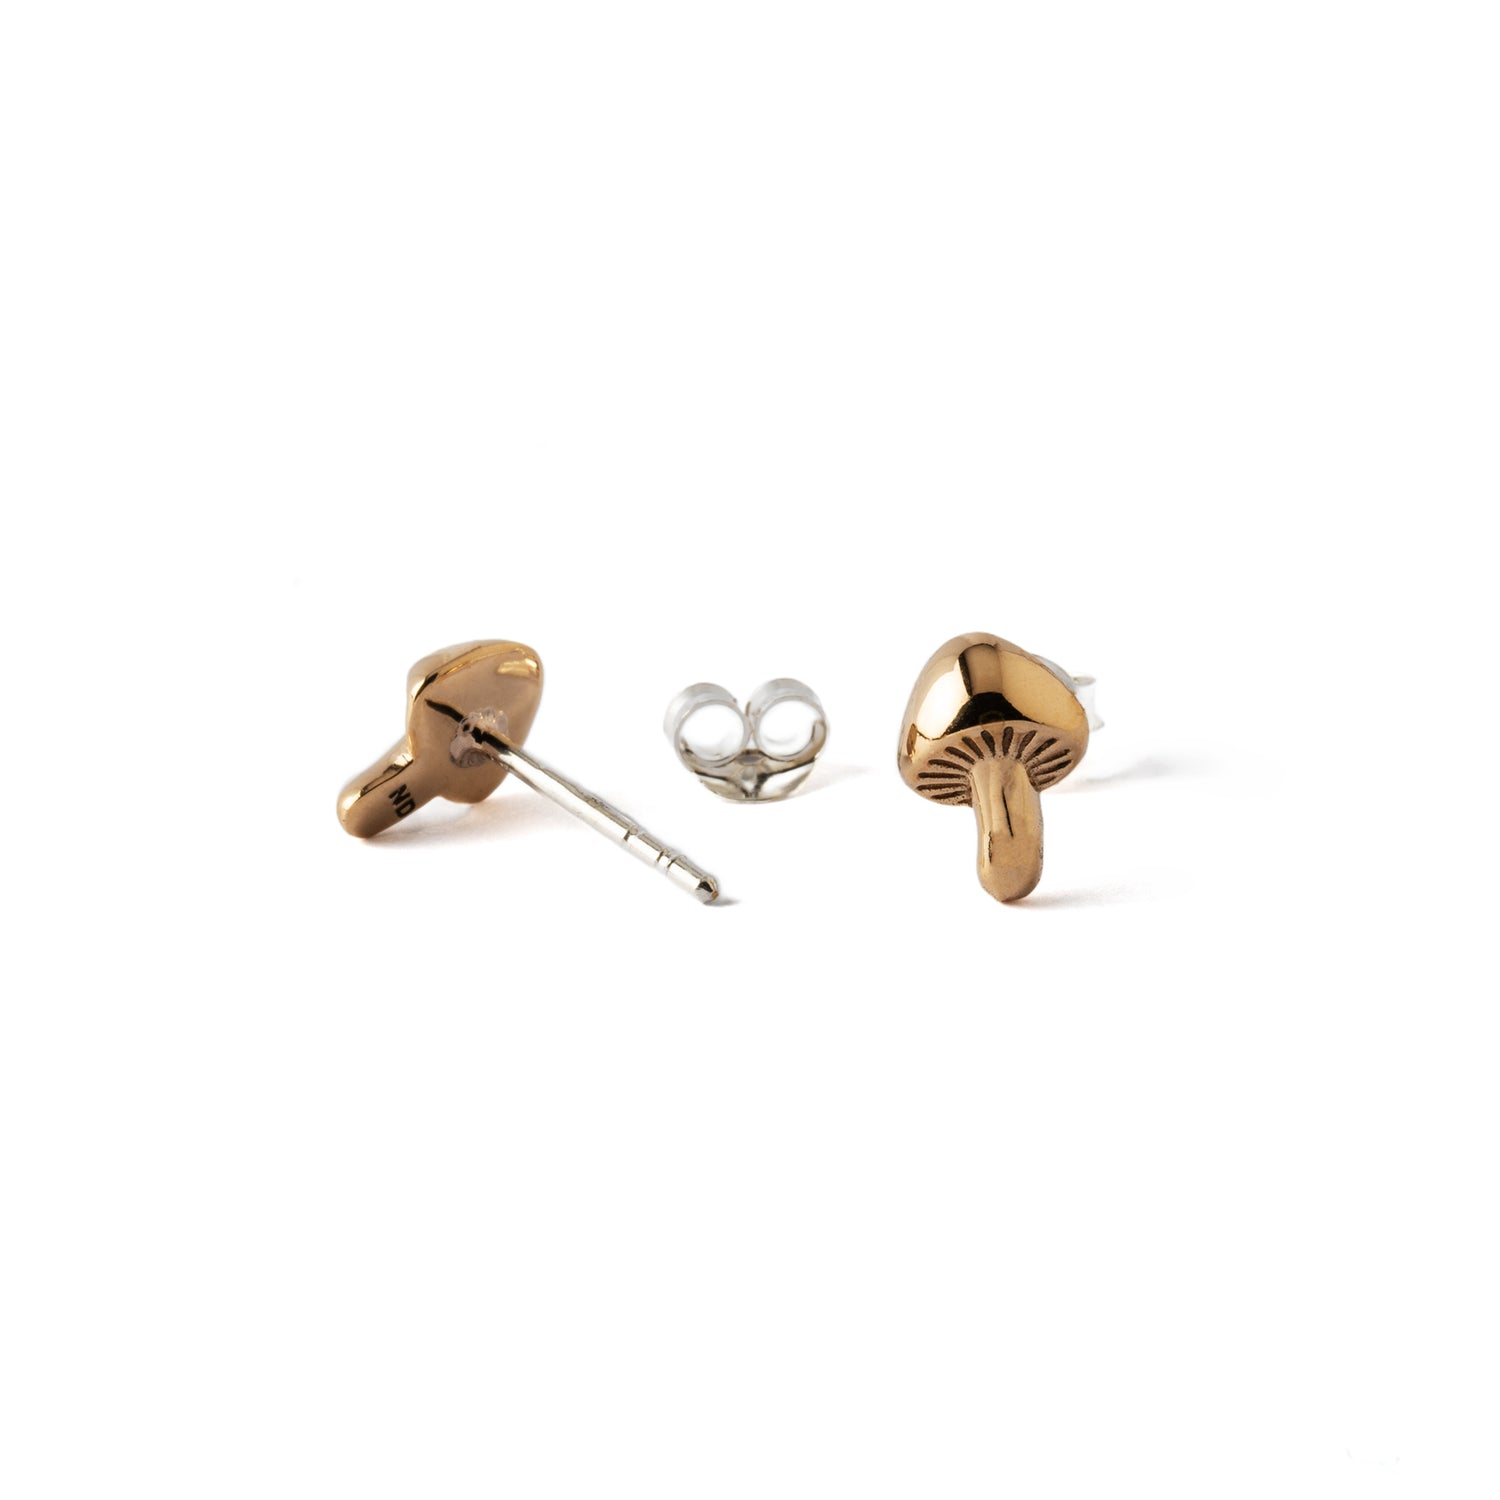 Mushroom Charm Studs front and back view